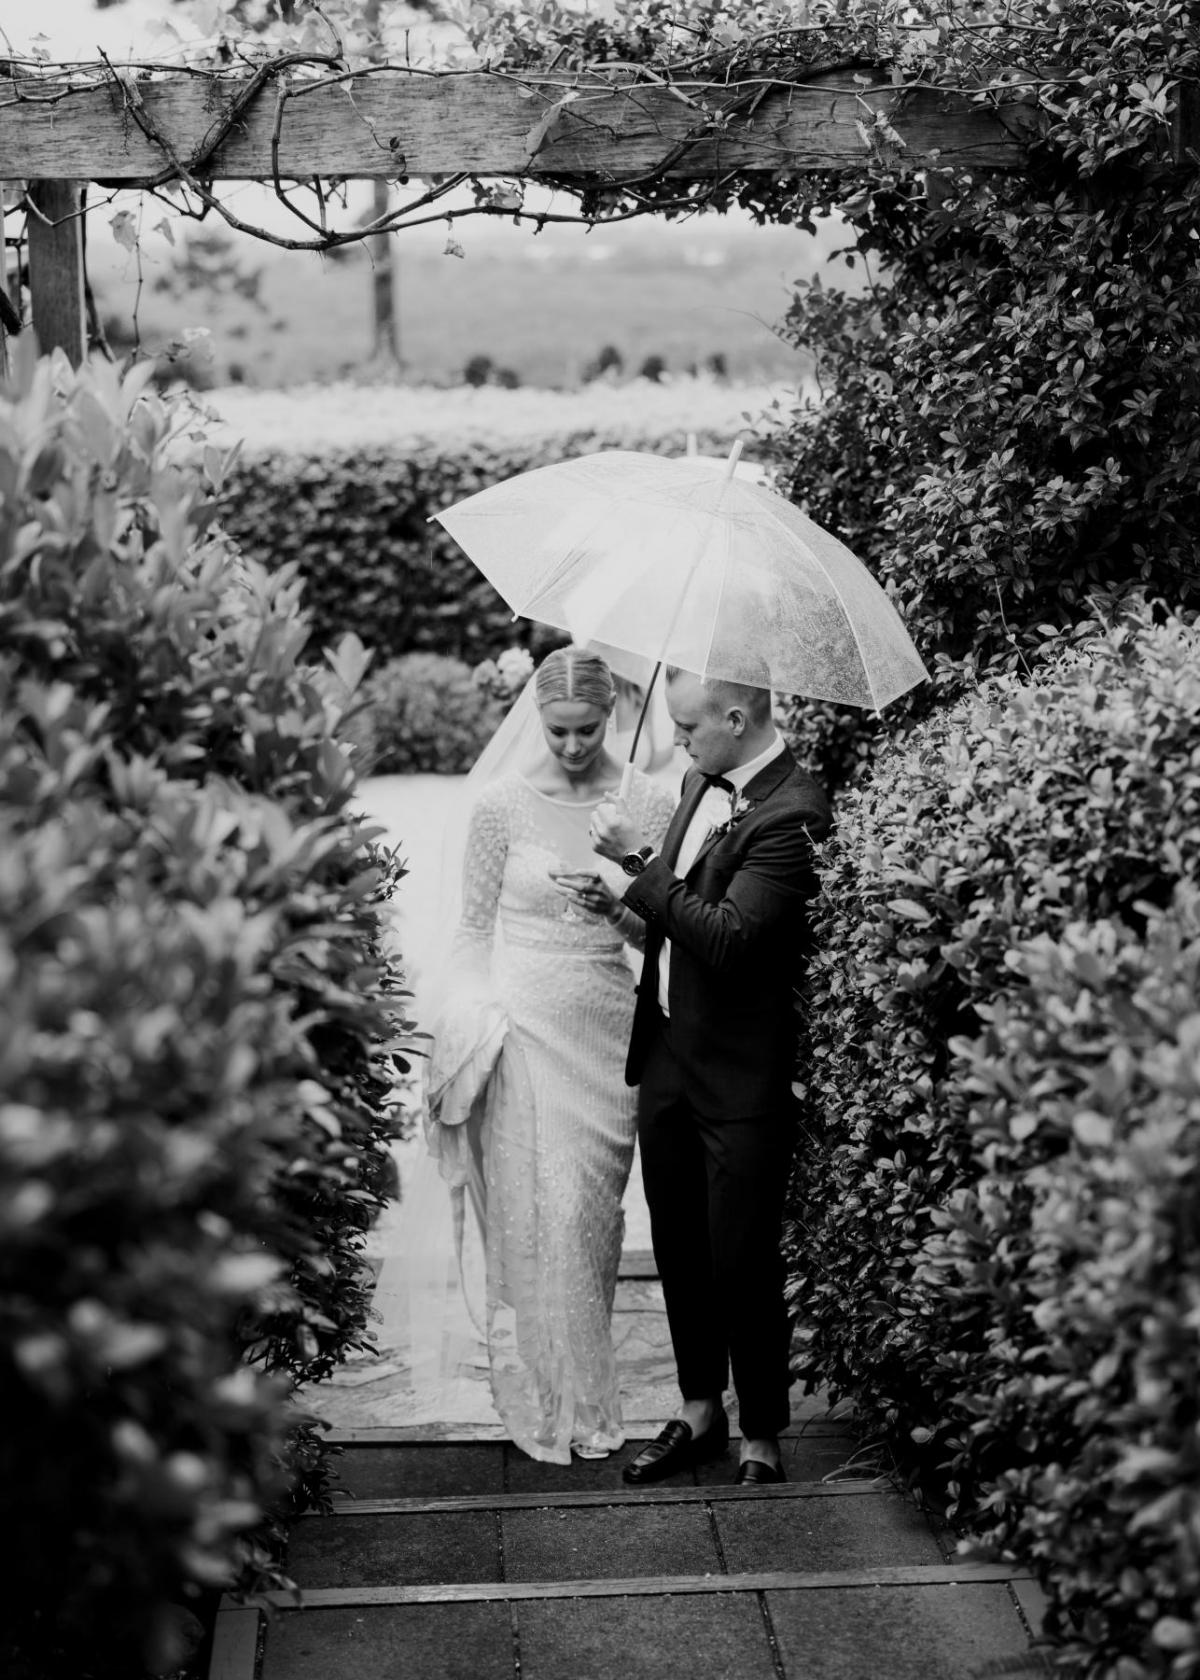 B&W image of Taylor and Kalen under an umbrella as she sheilds her modern Lexie wedding dress with long sleeves